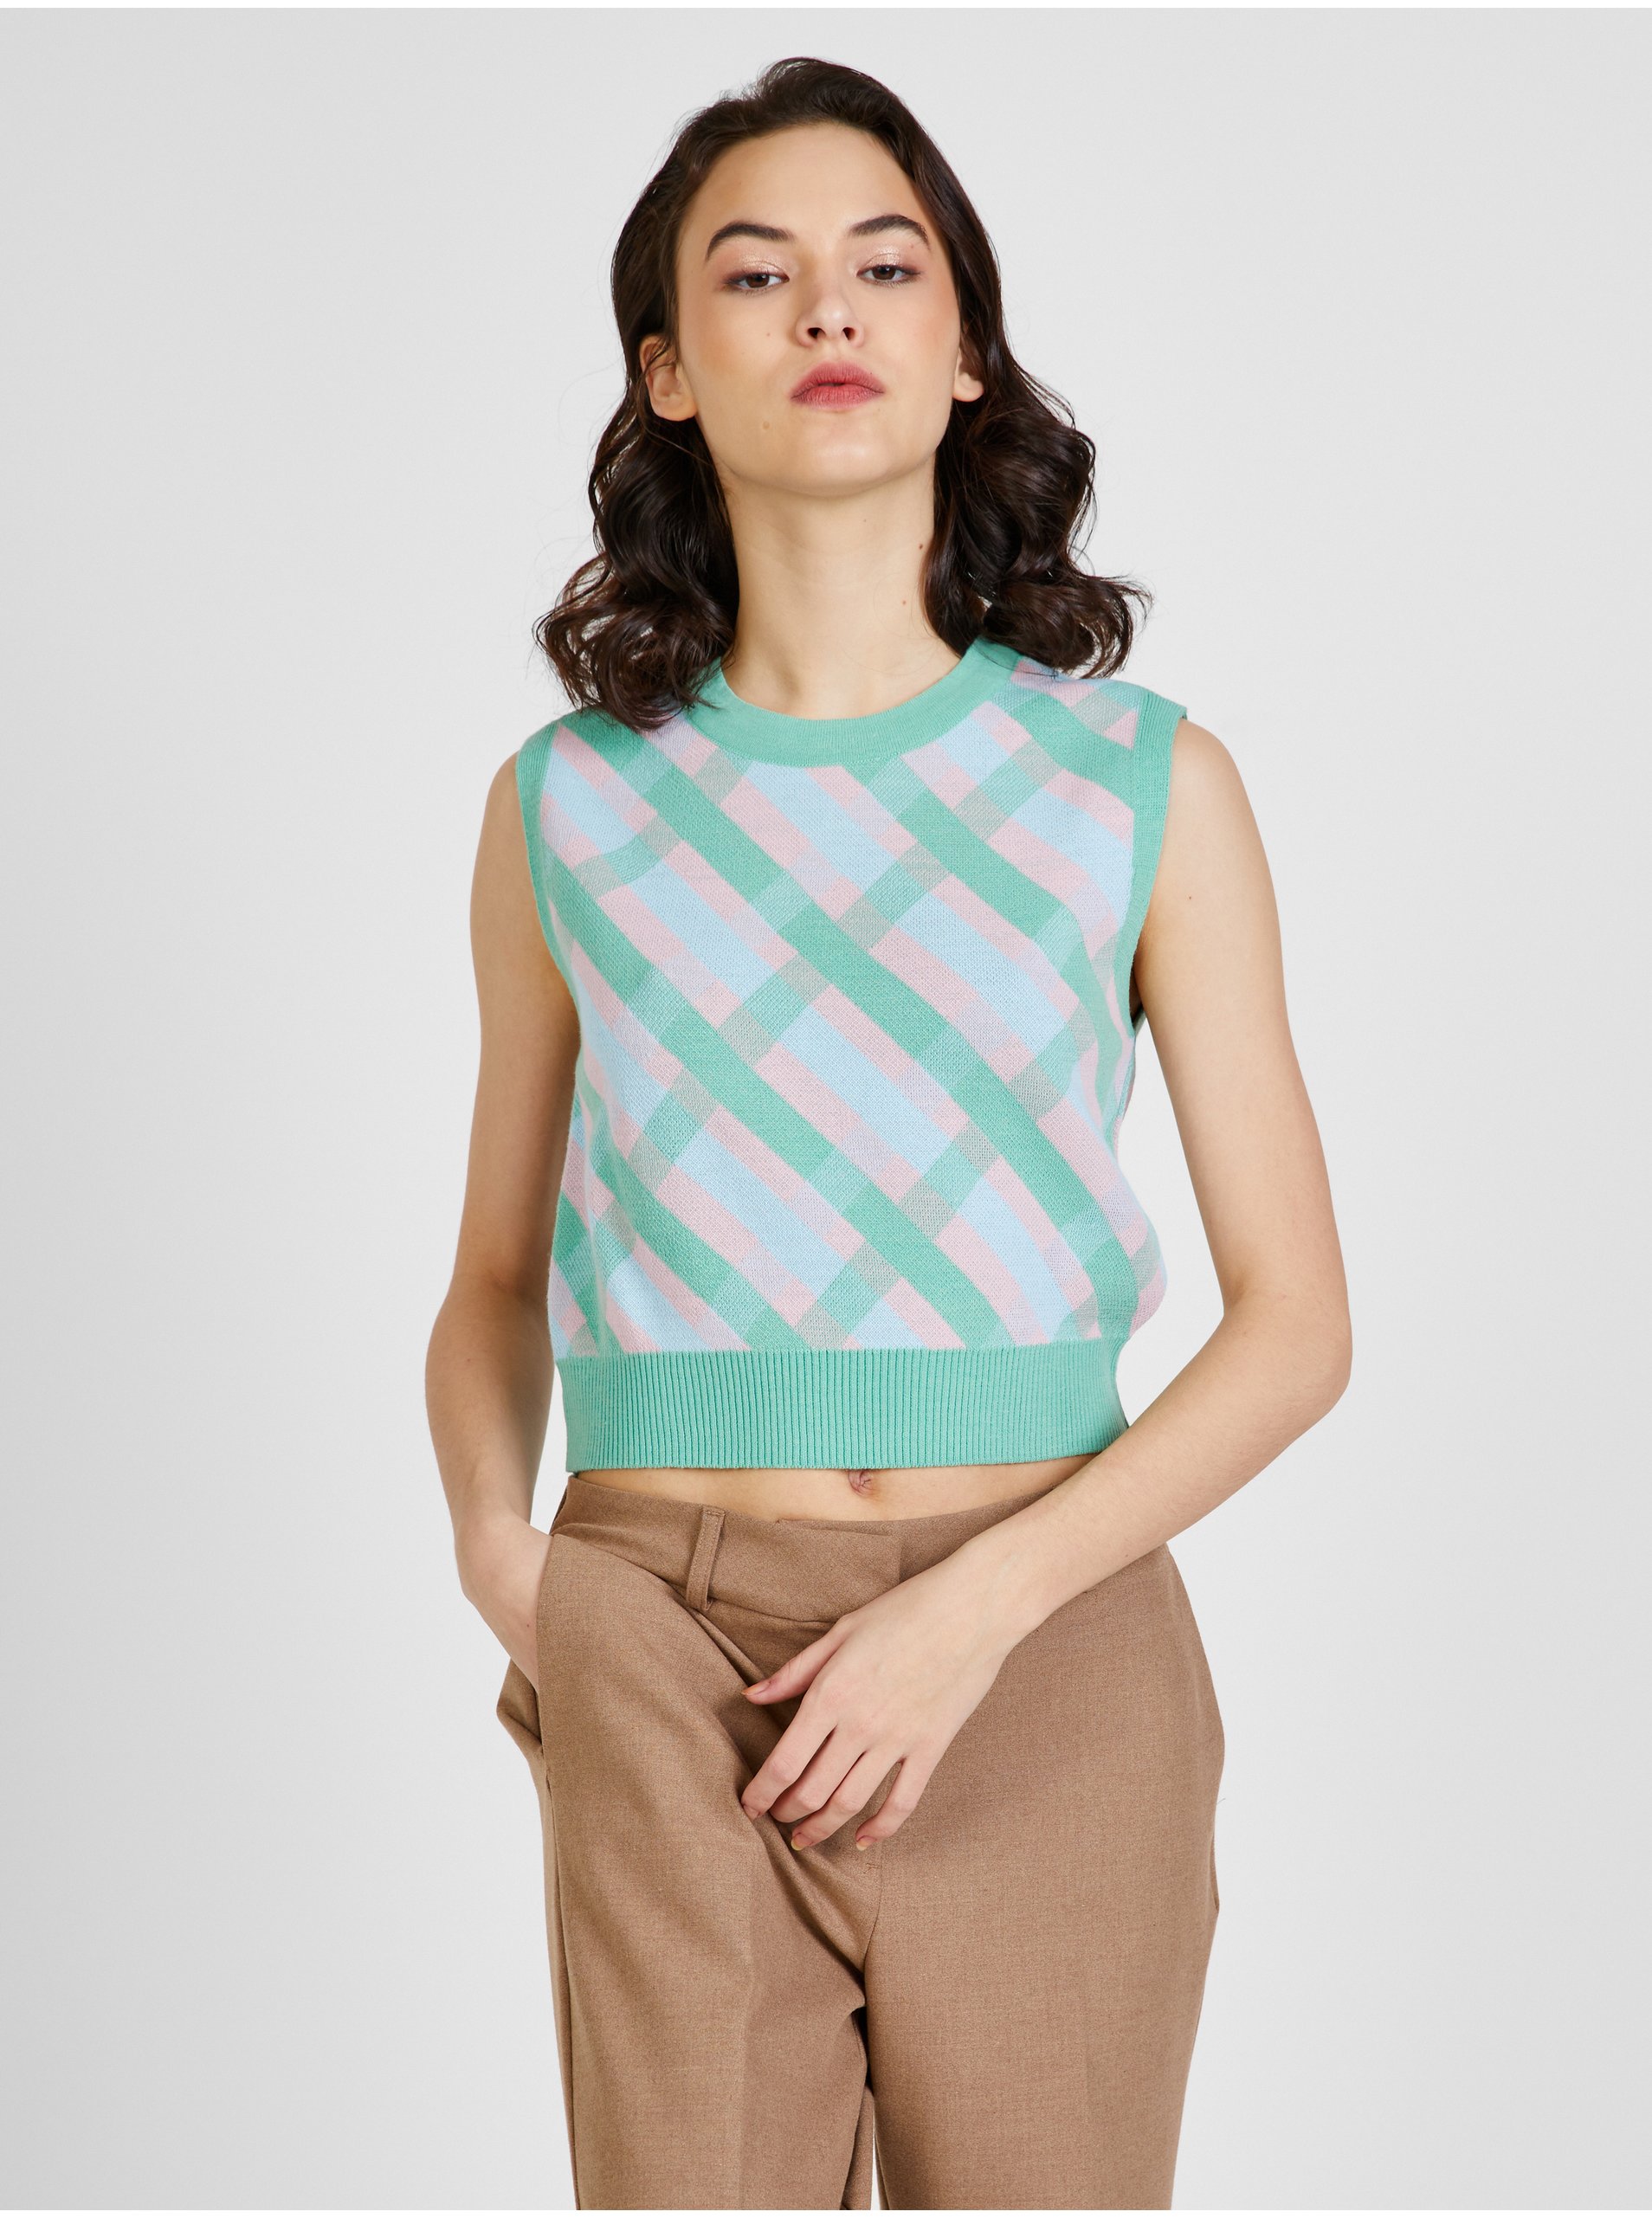 Blue-green Patterned Sweater Vest ONLY Ariana - Women